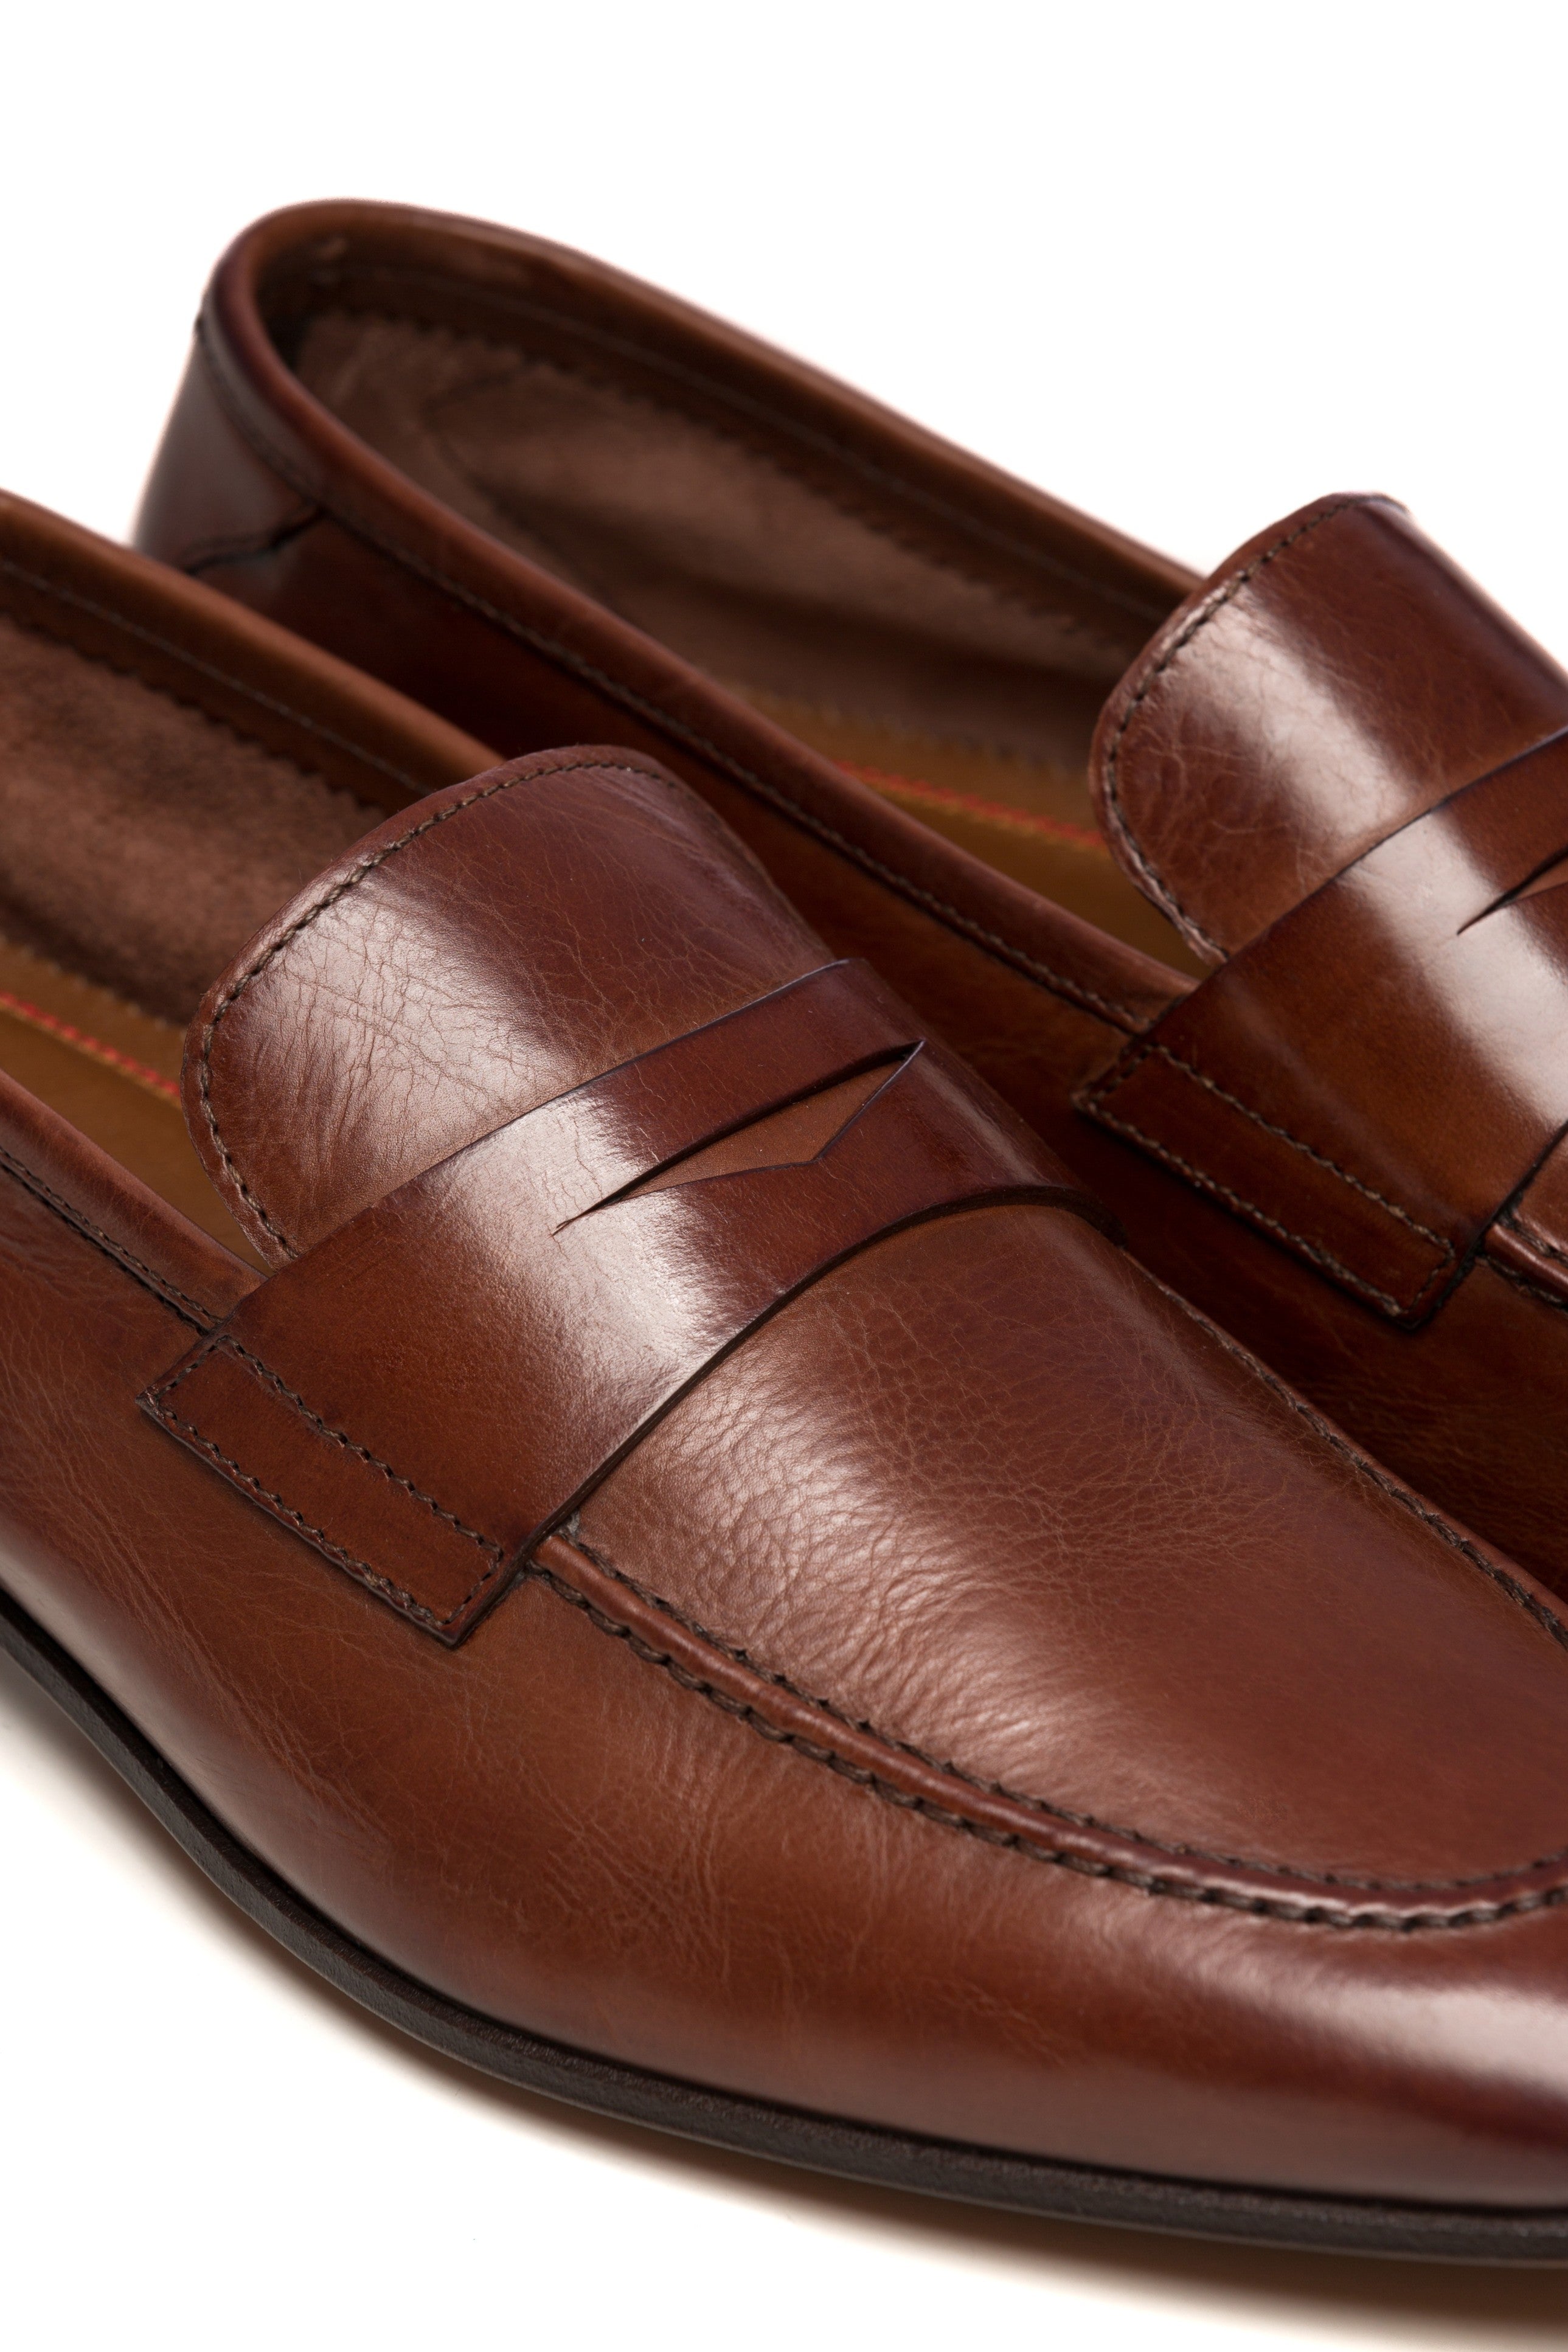 Brown natural leather moccasins